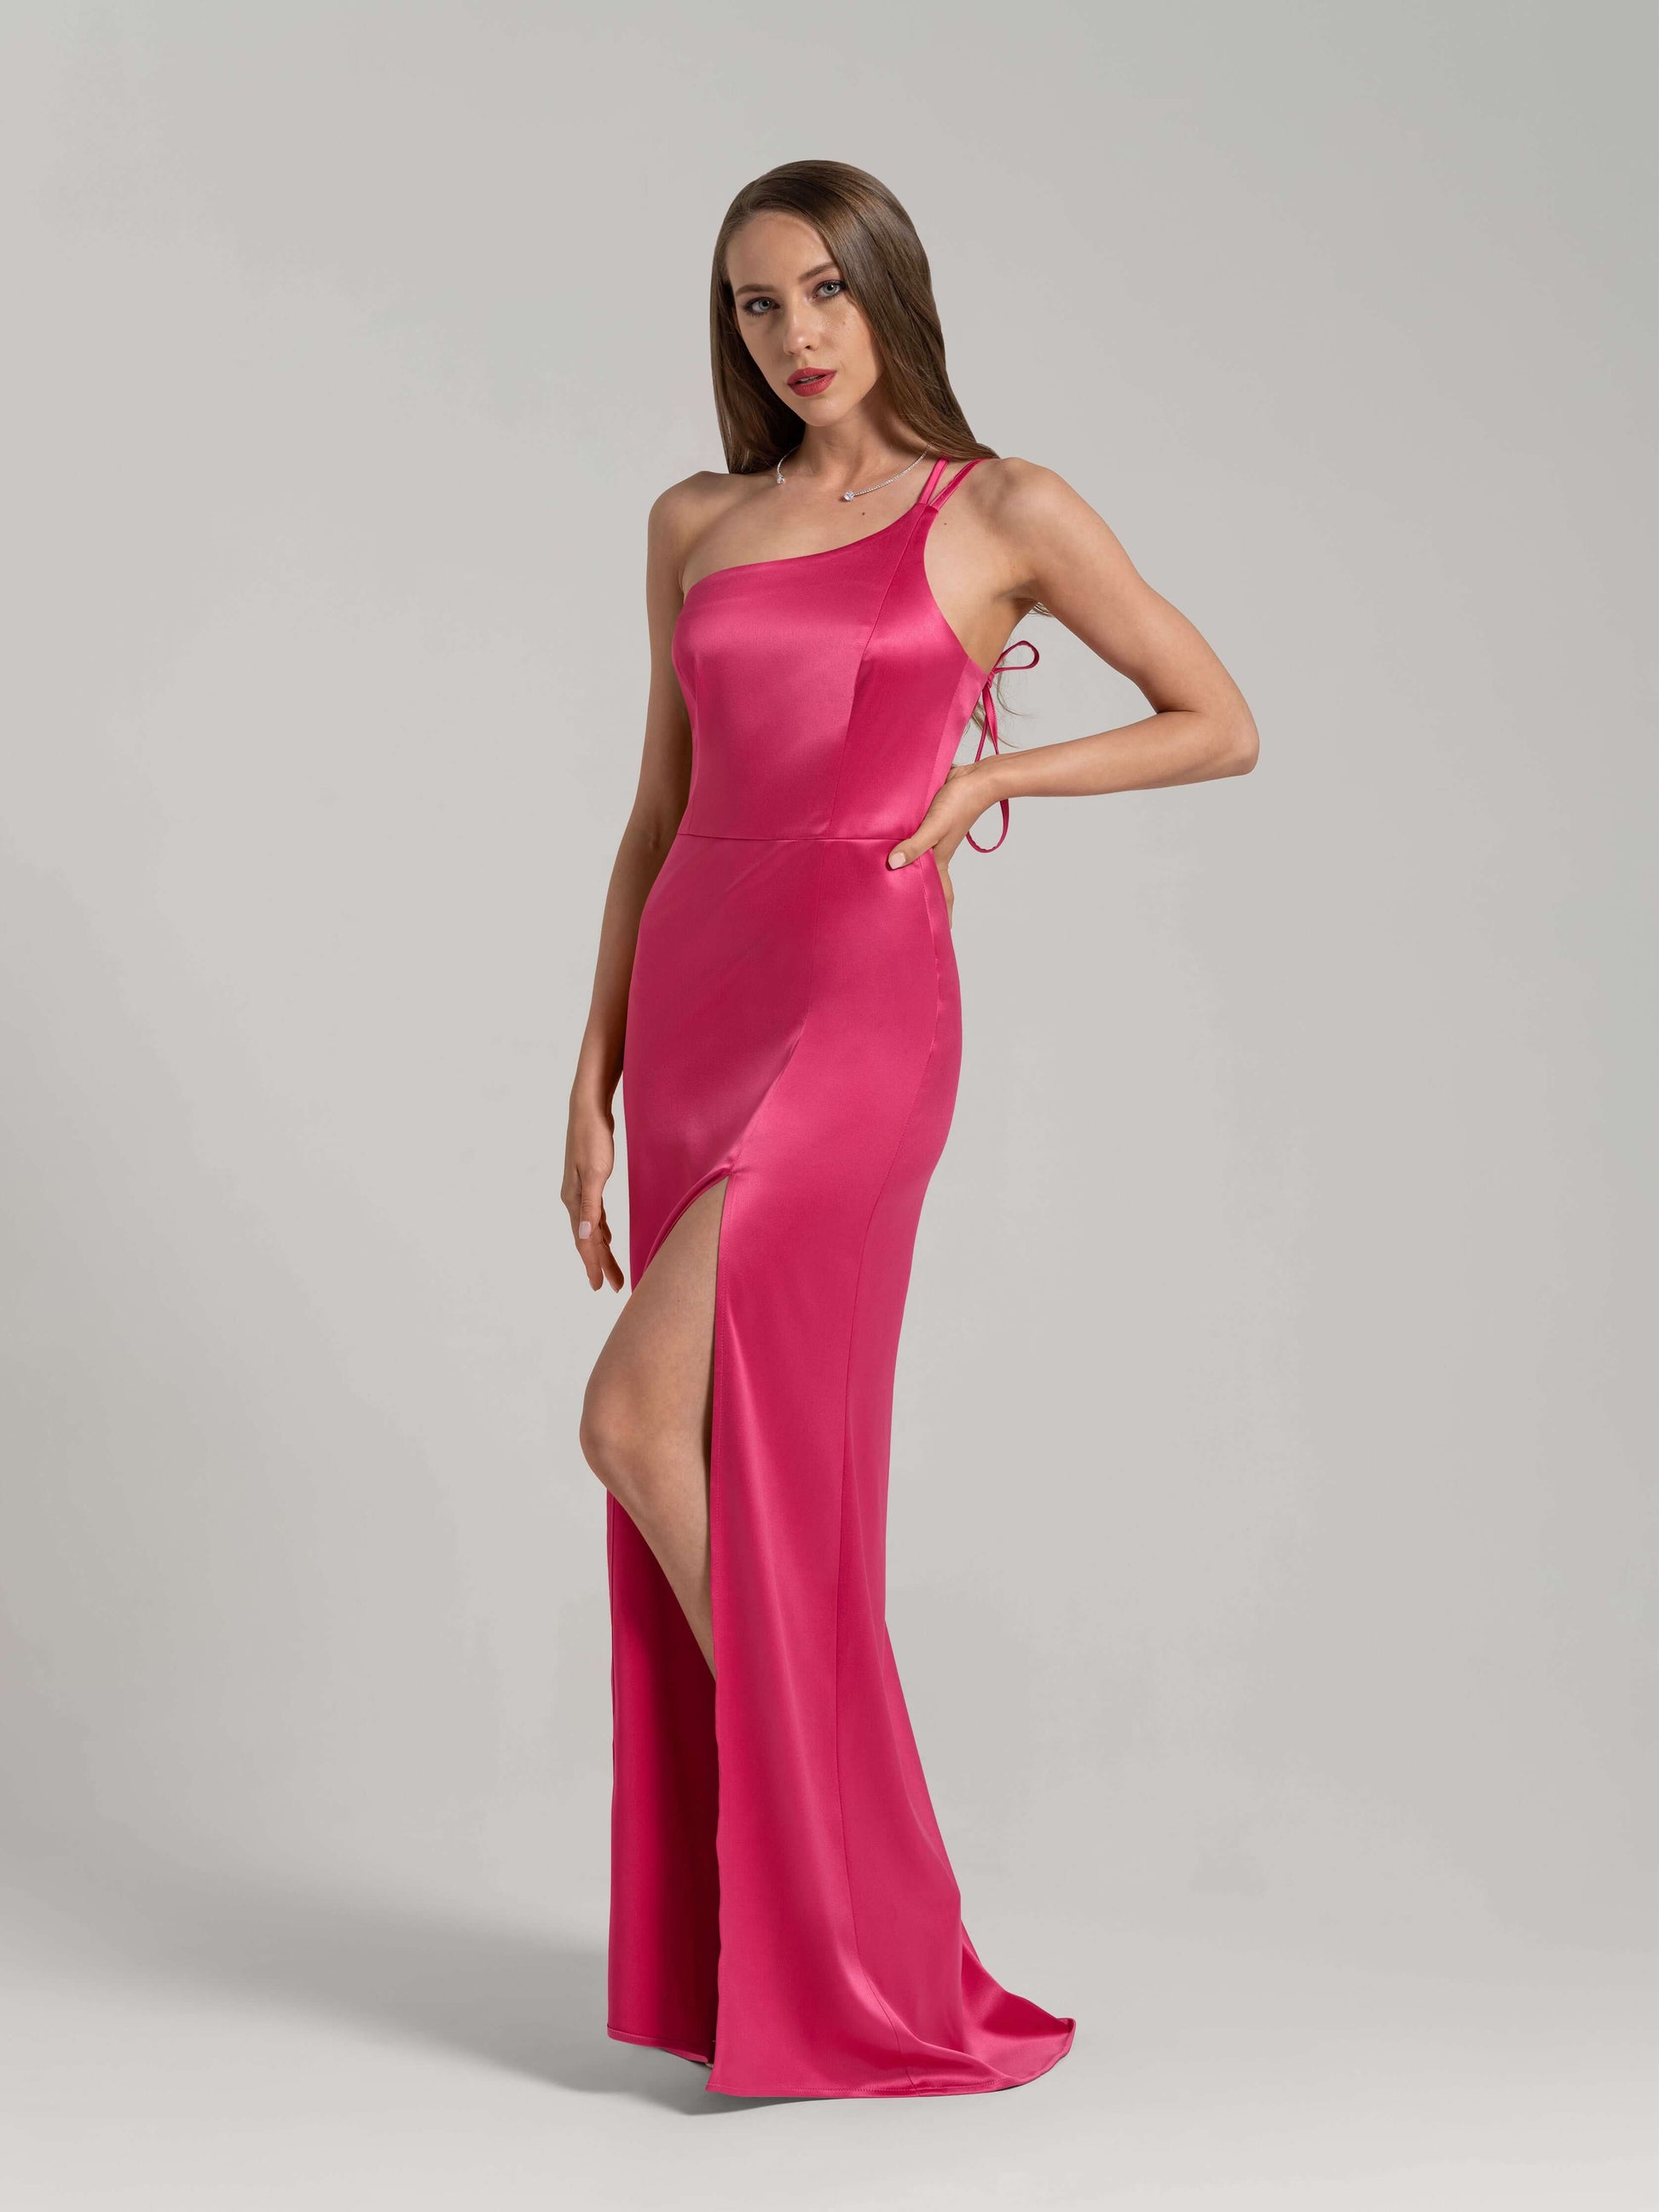 Goddess of Love Long Gown - Hot Pink by Tia Dorraine Women's Luxury Fashion Designer Clothing Brand